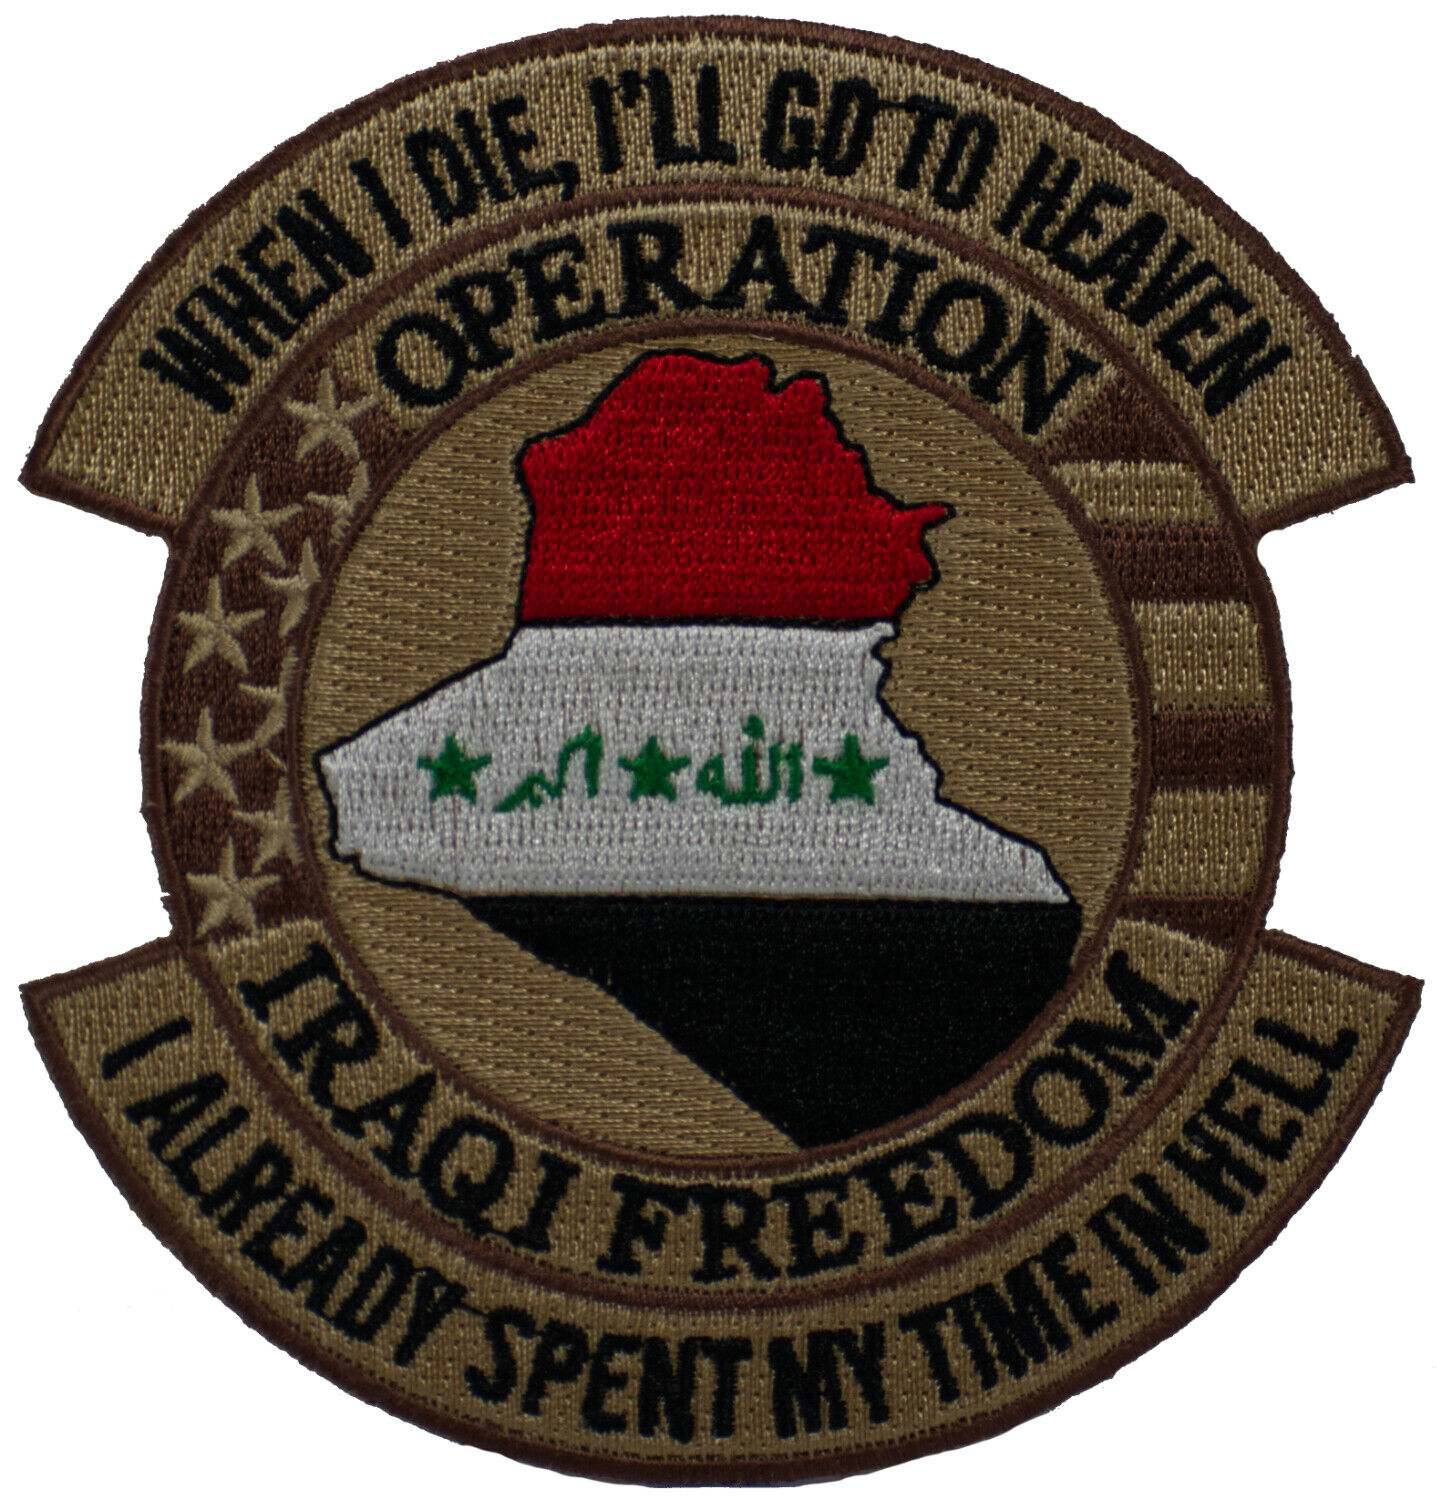 OPERATION IRAQI FREEDOM I ALREADY SPENT MY TIME IN HELL PATCH VETERAN OIF MAP